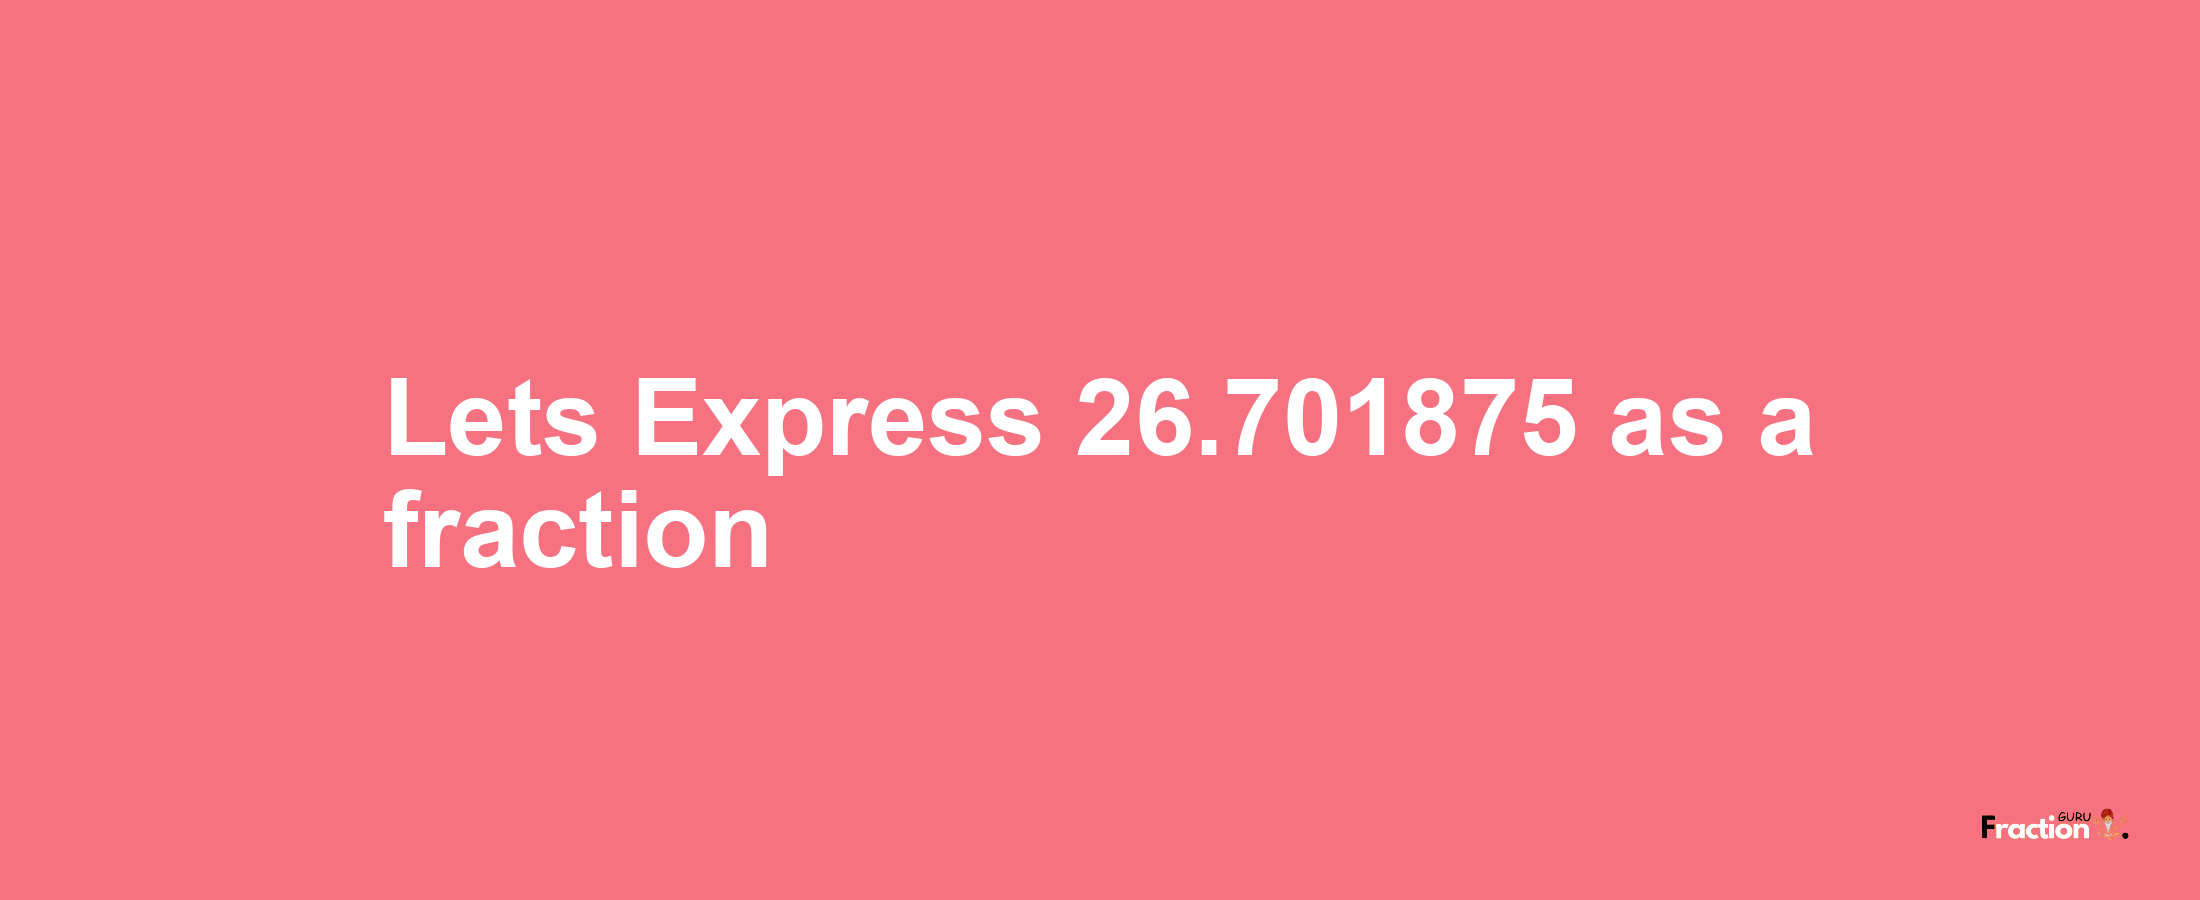 Lets Express 26.701875 as afraction